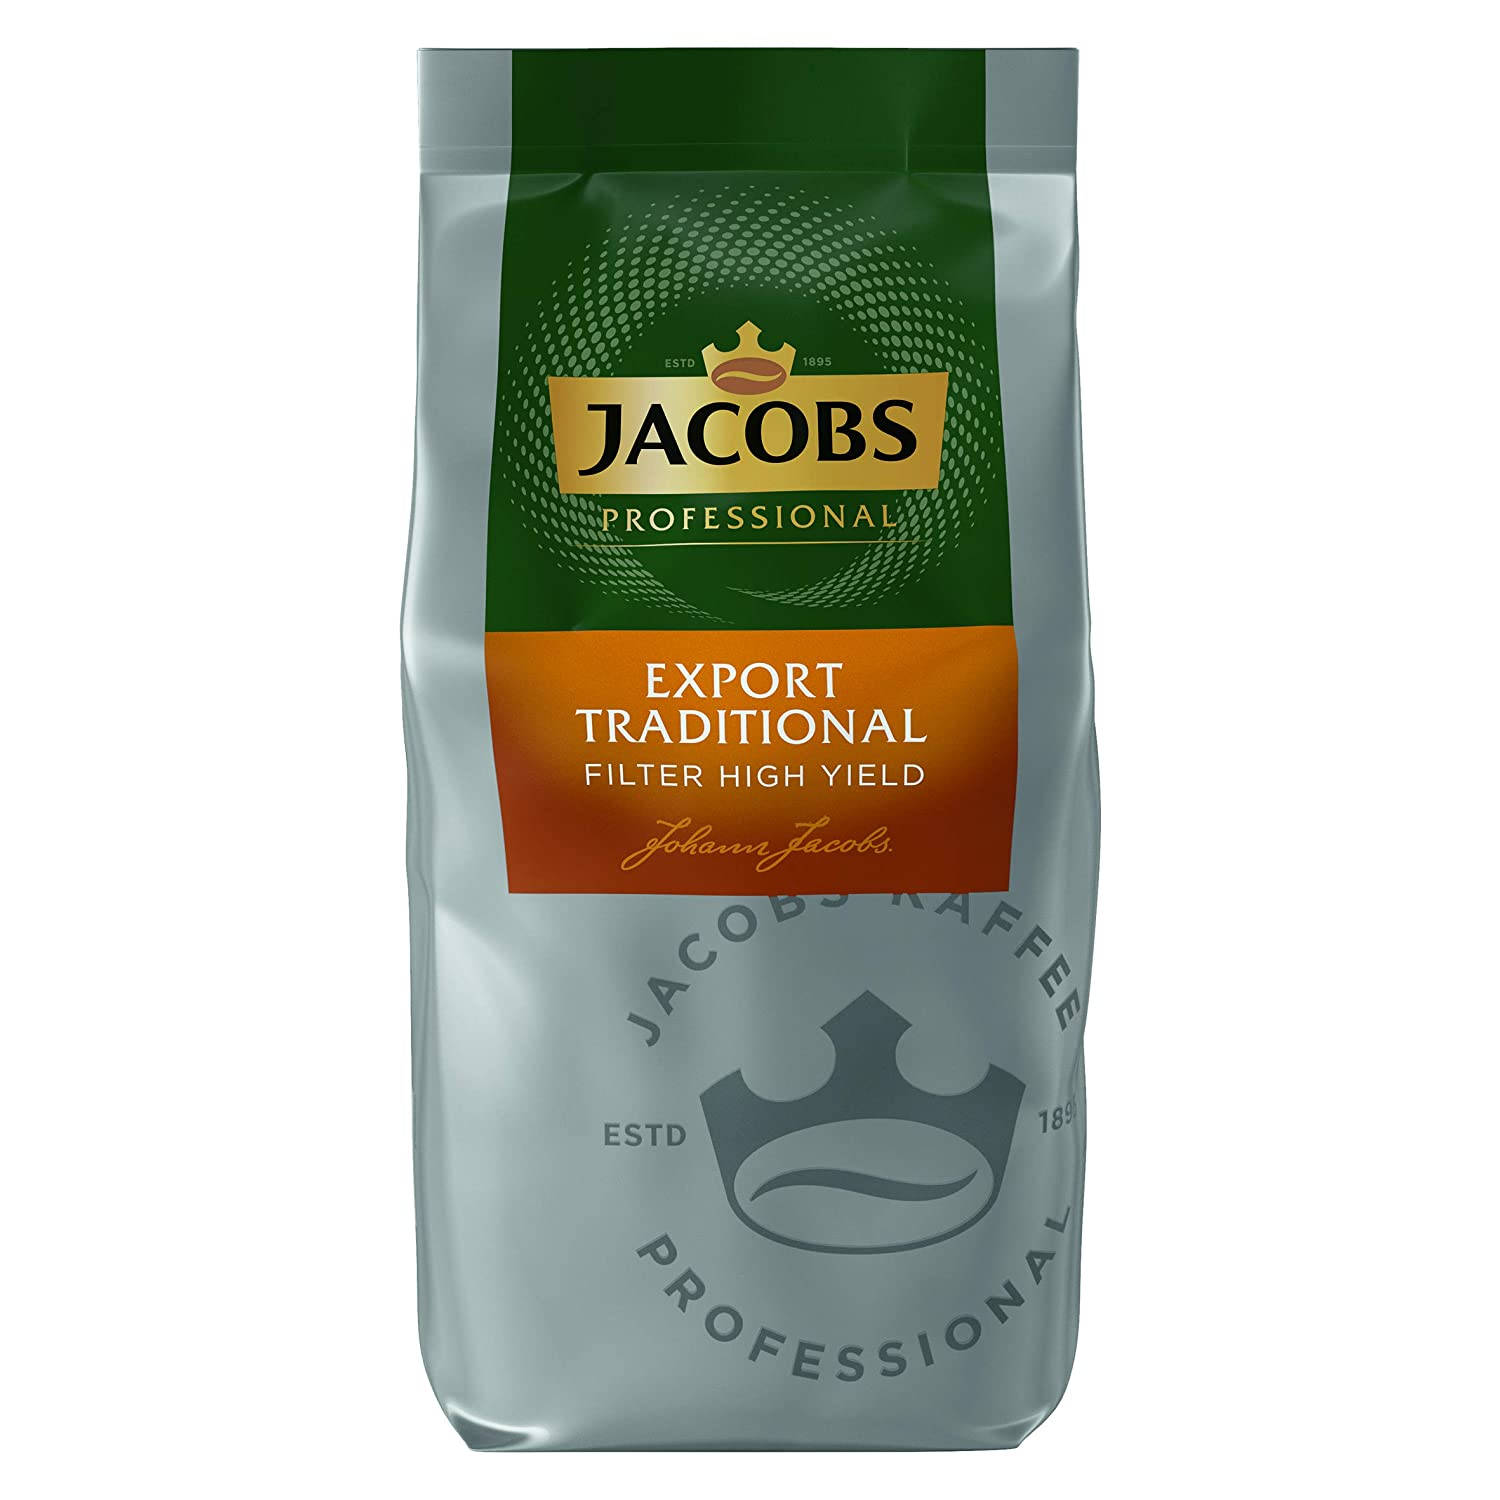 2x800g Export Professional JACOBS Filterkaffee French (Filtermaschinen, Press) Yield Traditional High